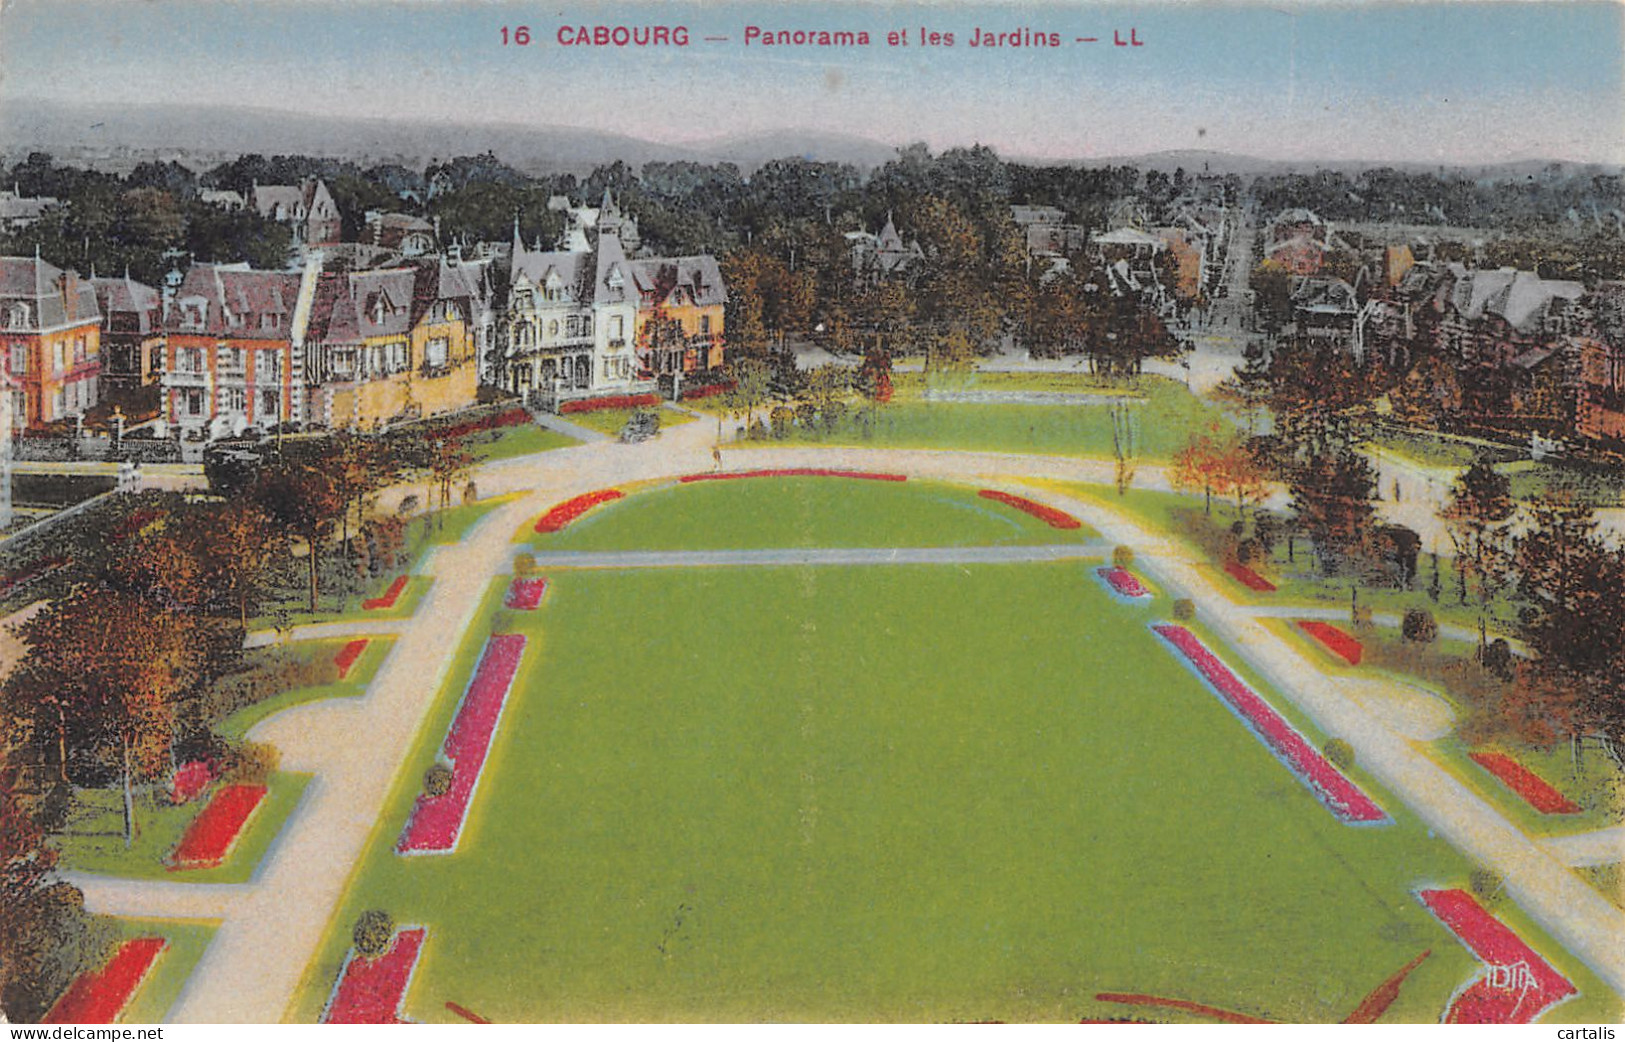 14-CABOURG-N°3787-G/0161 - Cabourg